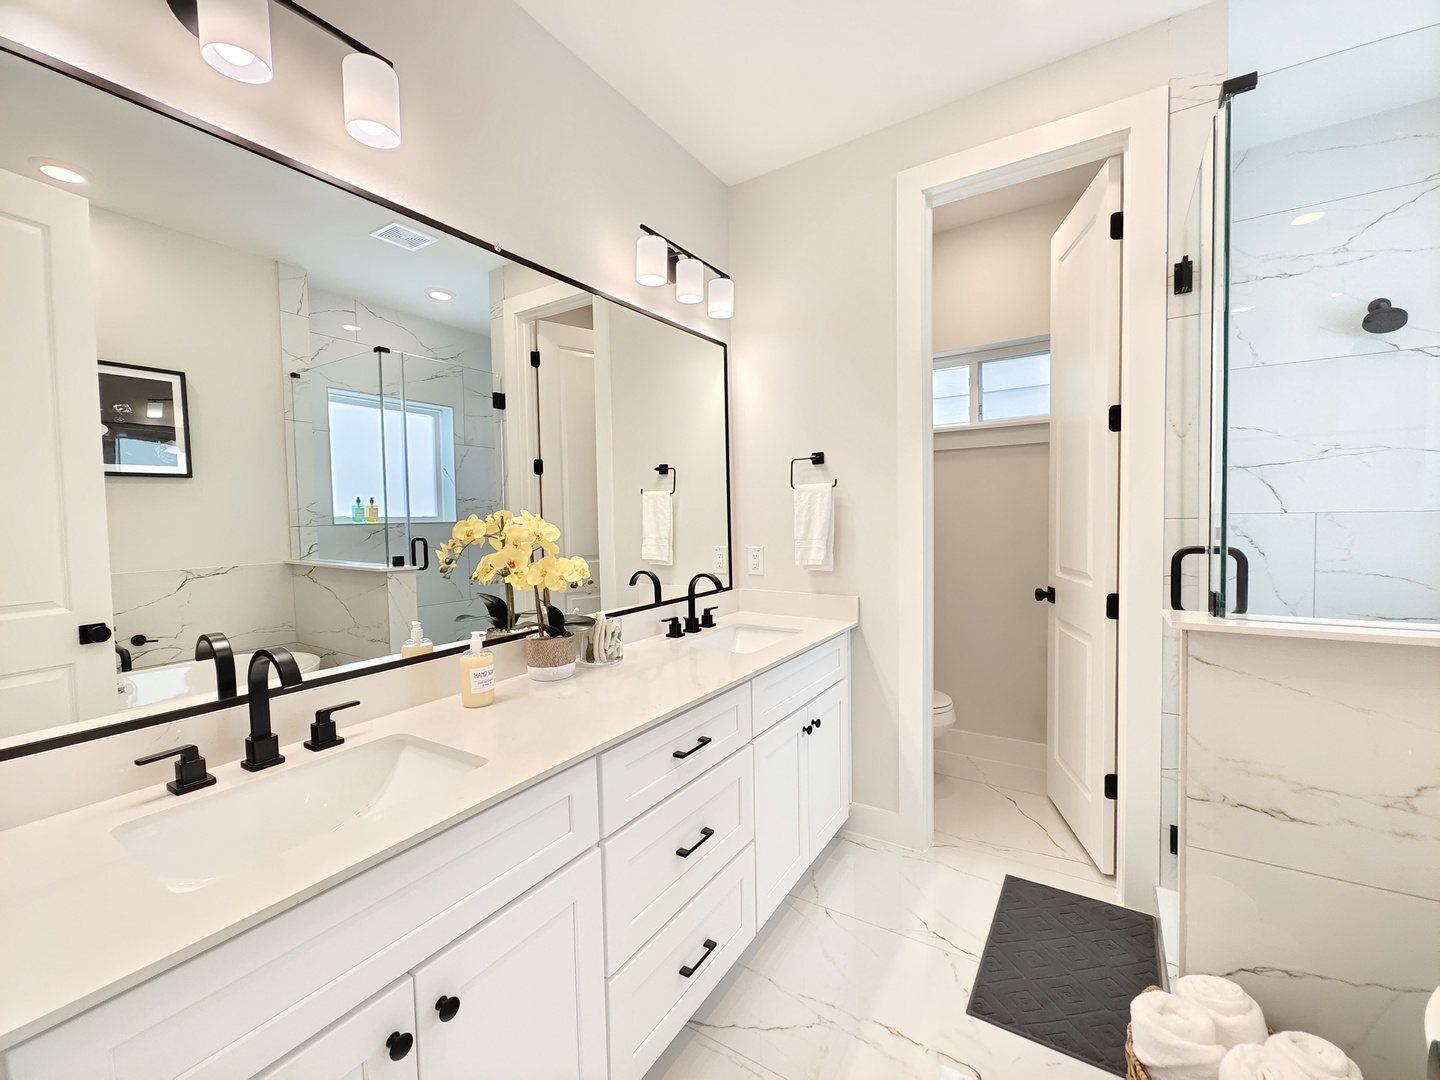 The master ensuite features a double vanity, glass shower, & soaking tub